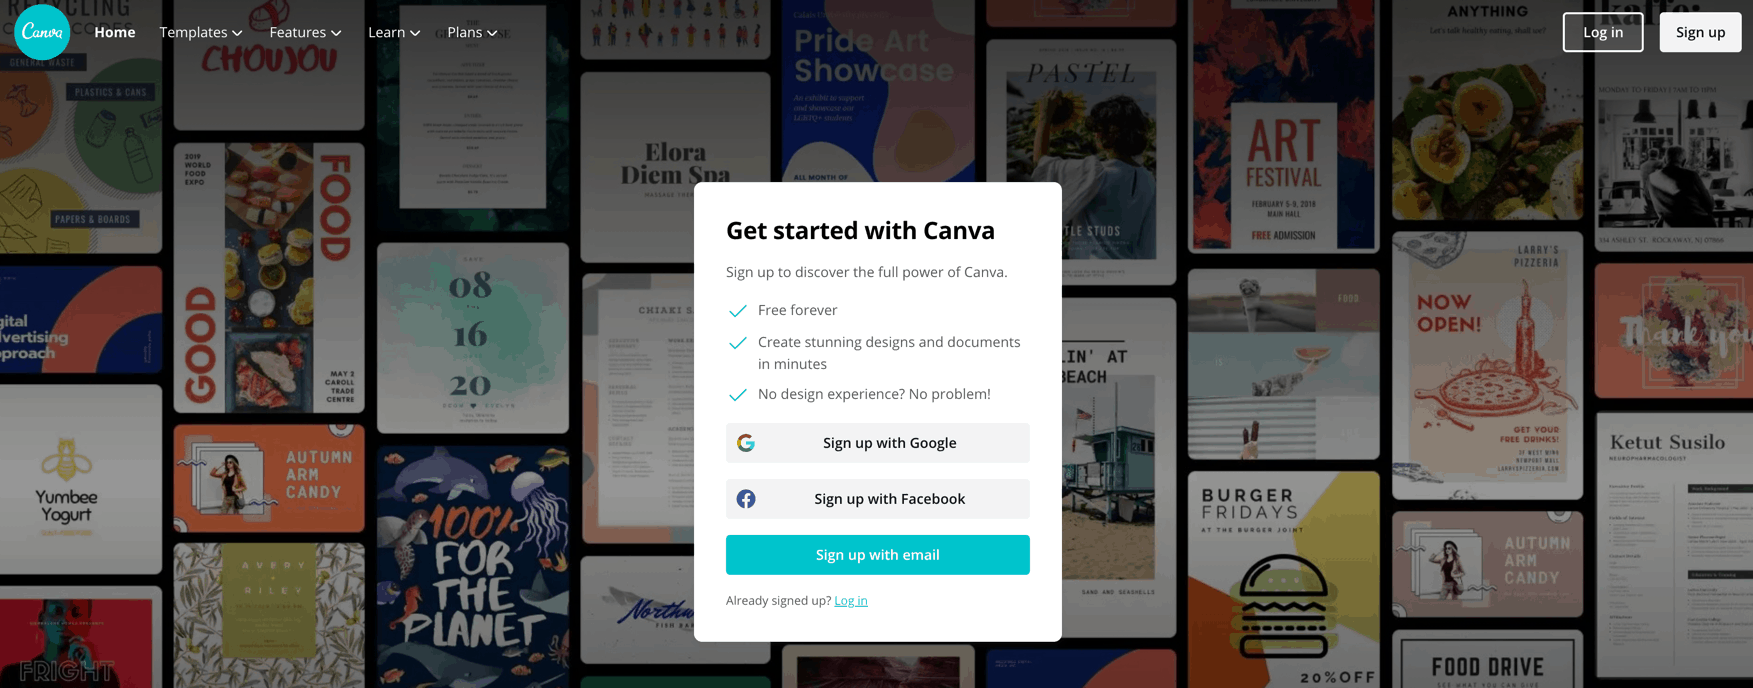 Canva signup page